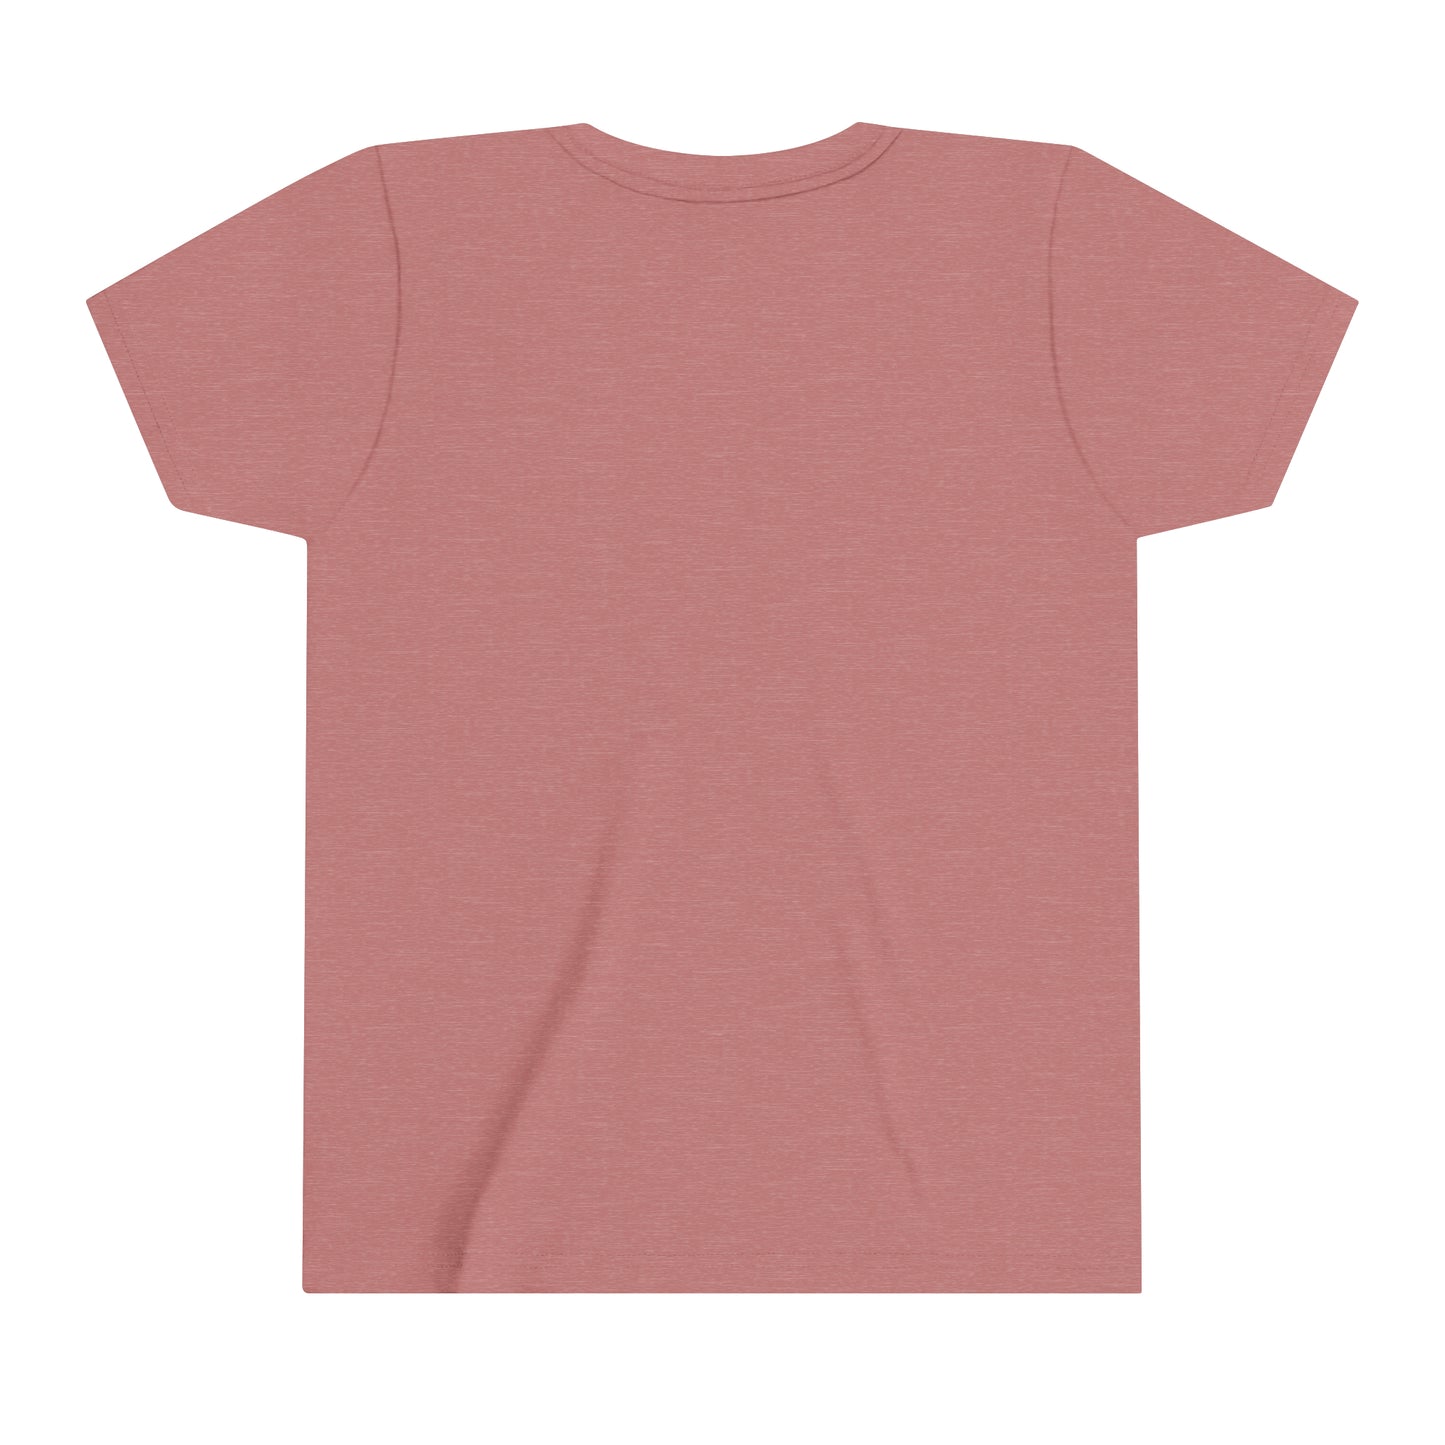 North Side Pride Youth Tee. Mauve.